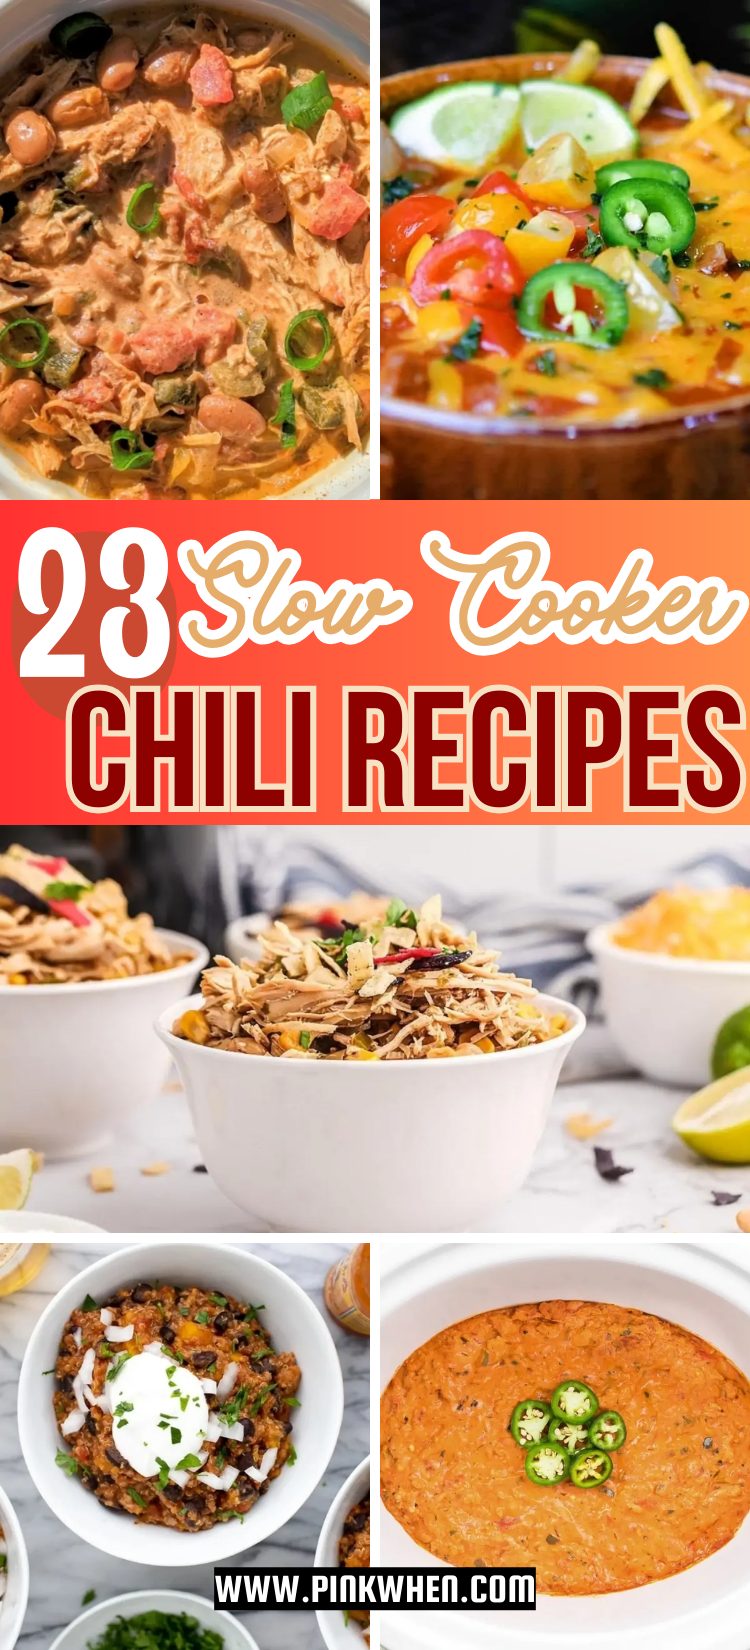 23 Slow Cooker Chili Recipes to Warm Your Heart